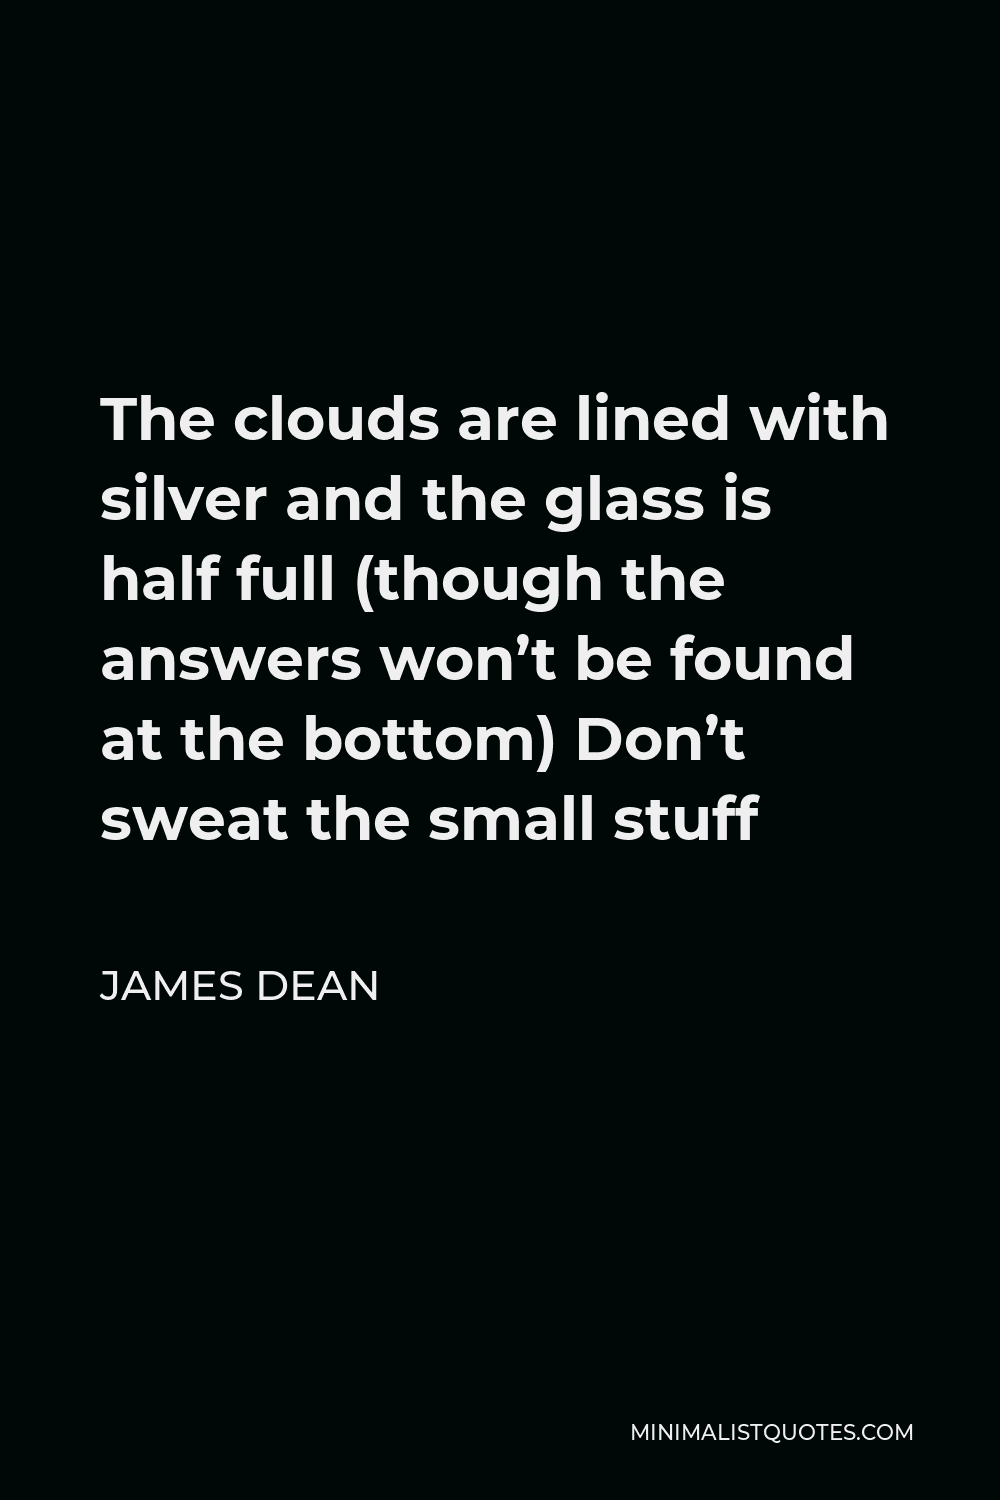 James Dean Quote - The clouds are lined with silver and the glass is half full (though the answers won’t be found at the bottom) Don’t sweat the small stuff